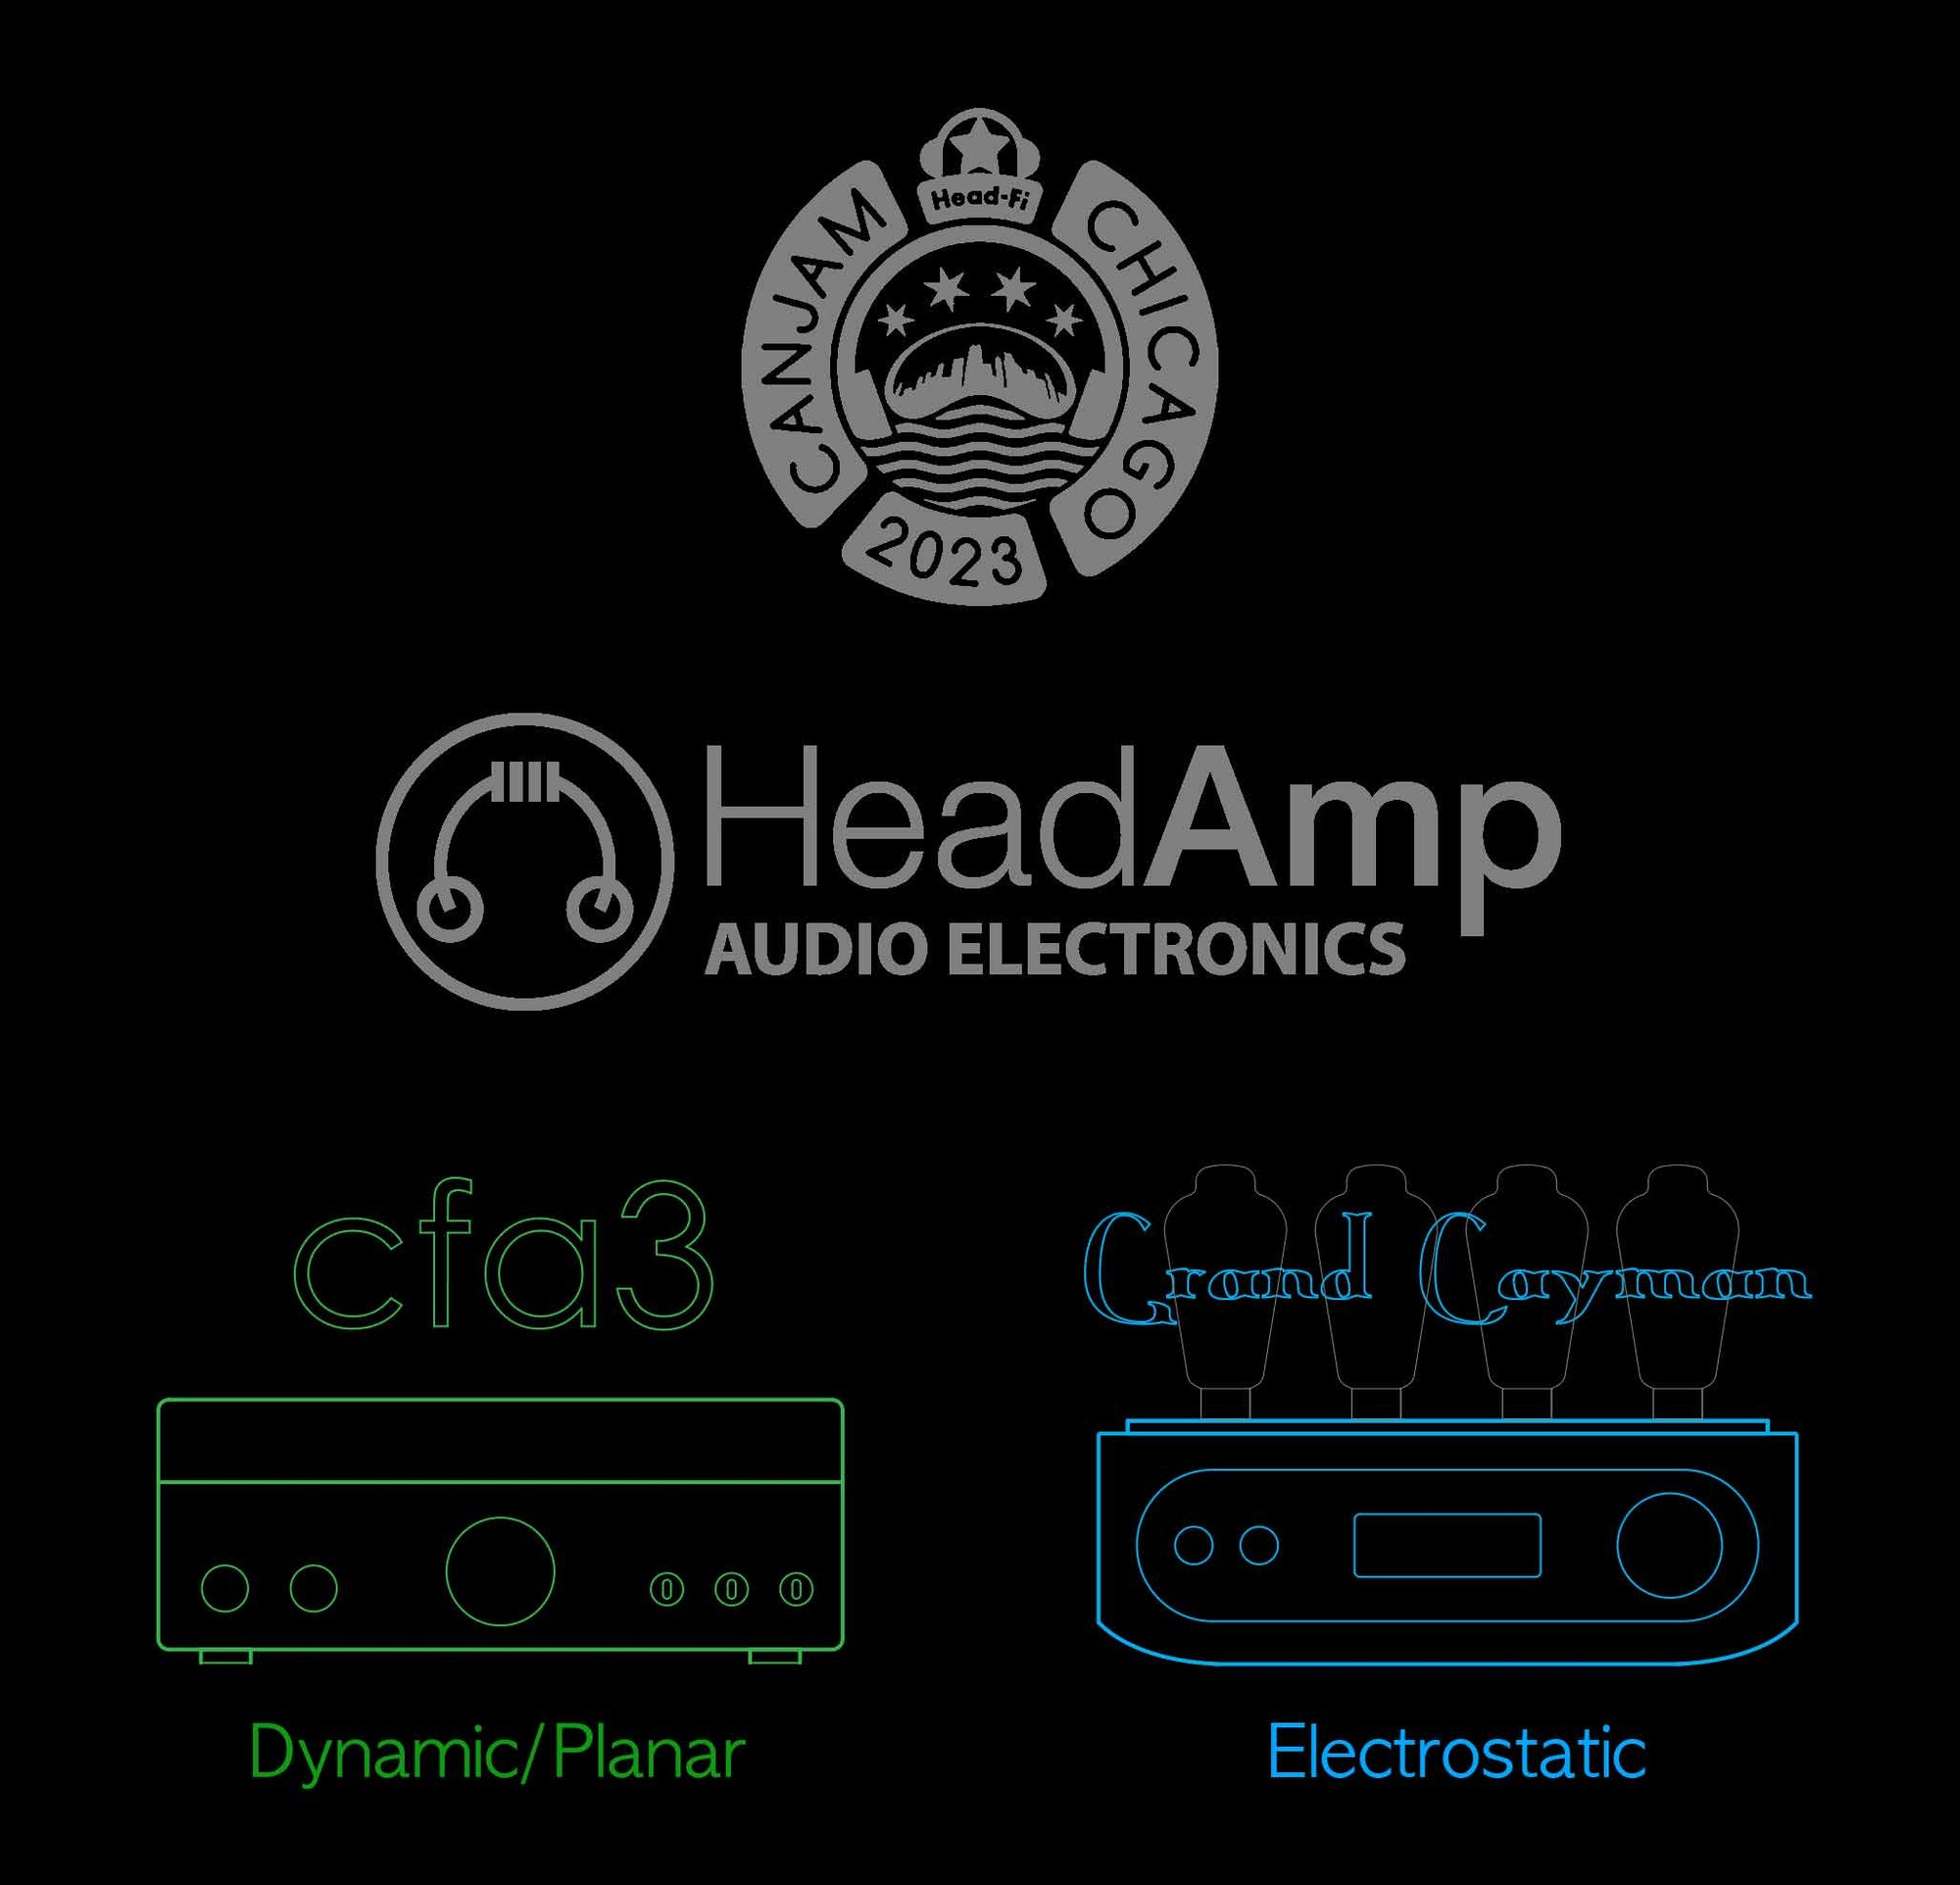 HeadAmp Announces All-New CFA3 Amplifier at CanJam Chicago 2023